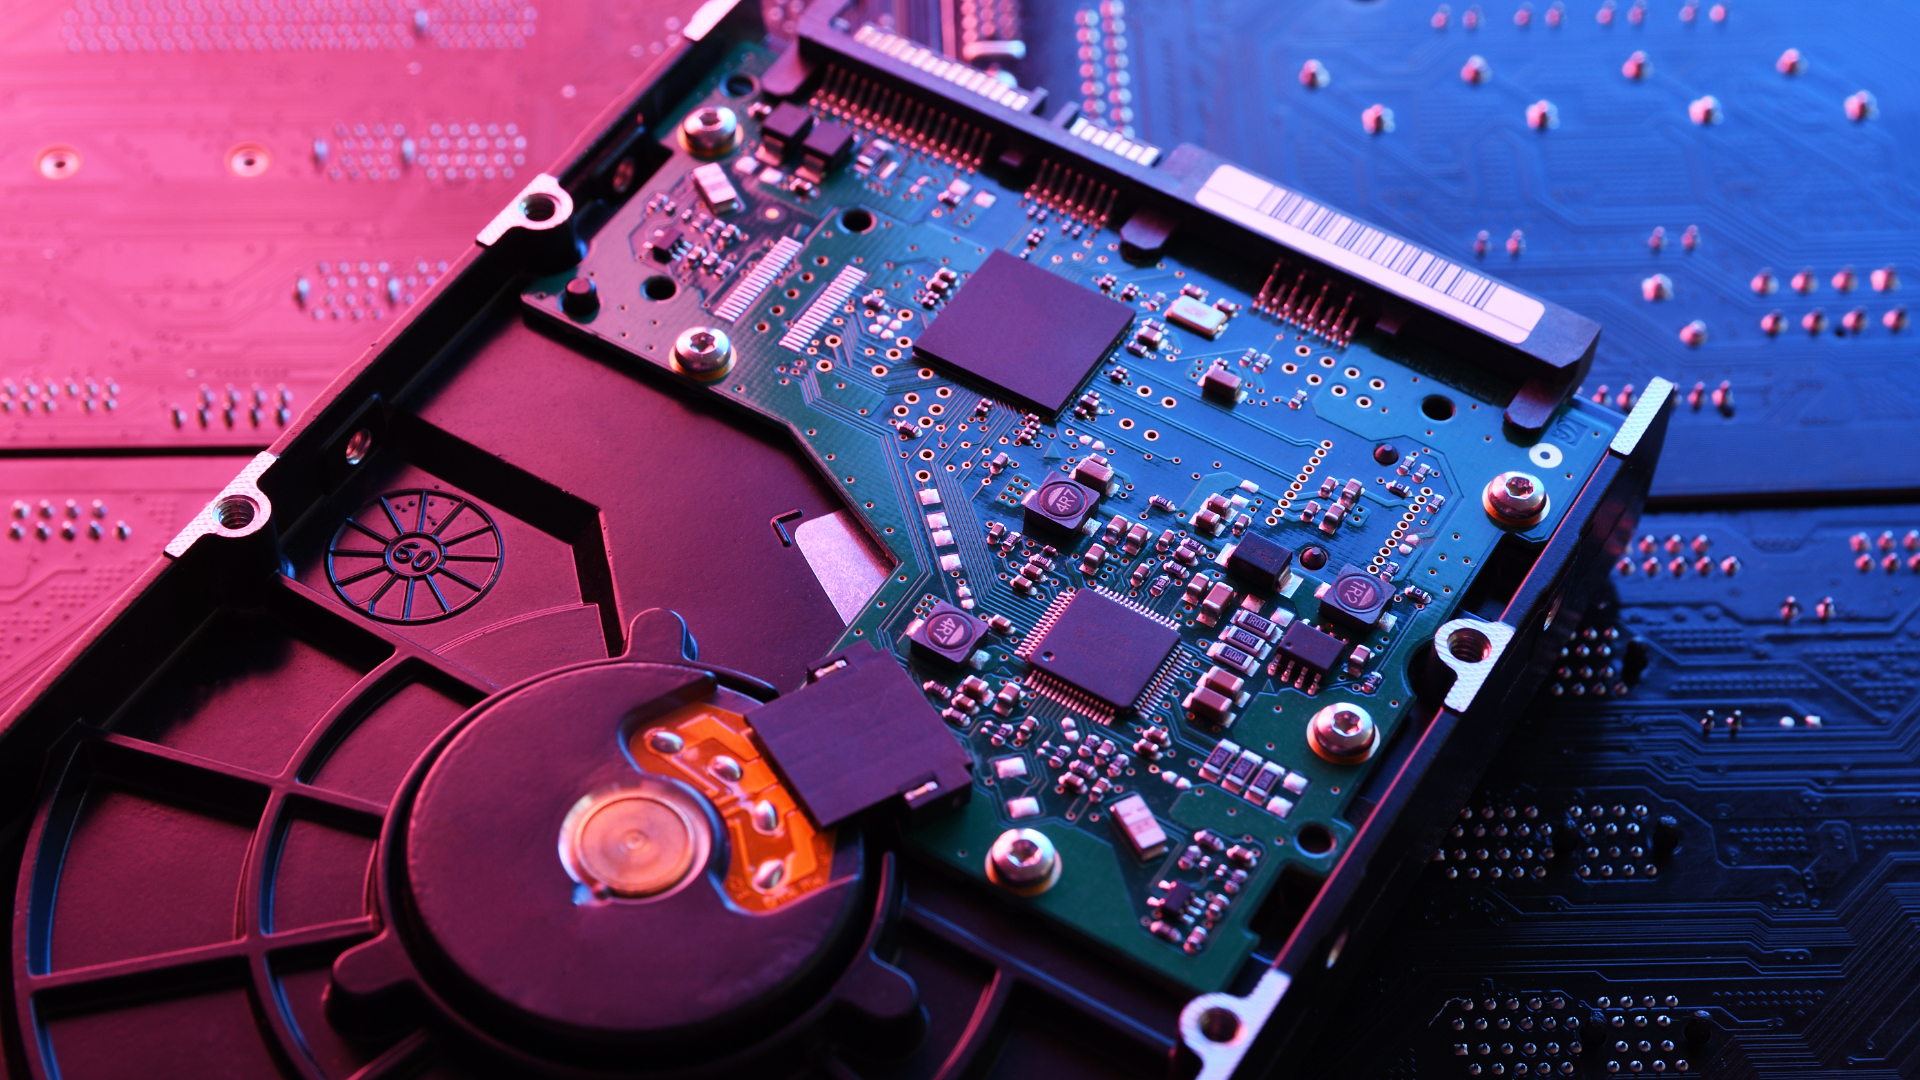 A mechanical hard drive lies on the desk face down, with blue and pink light shining on the HDD